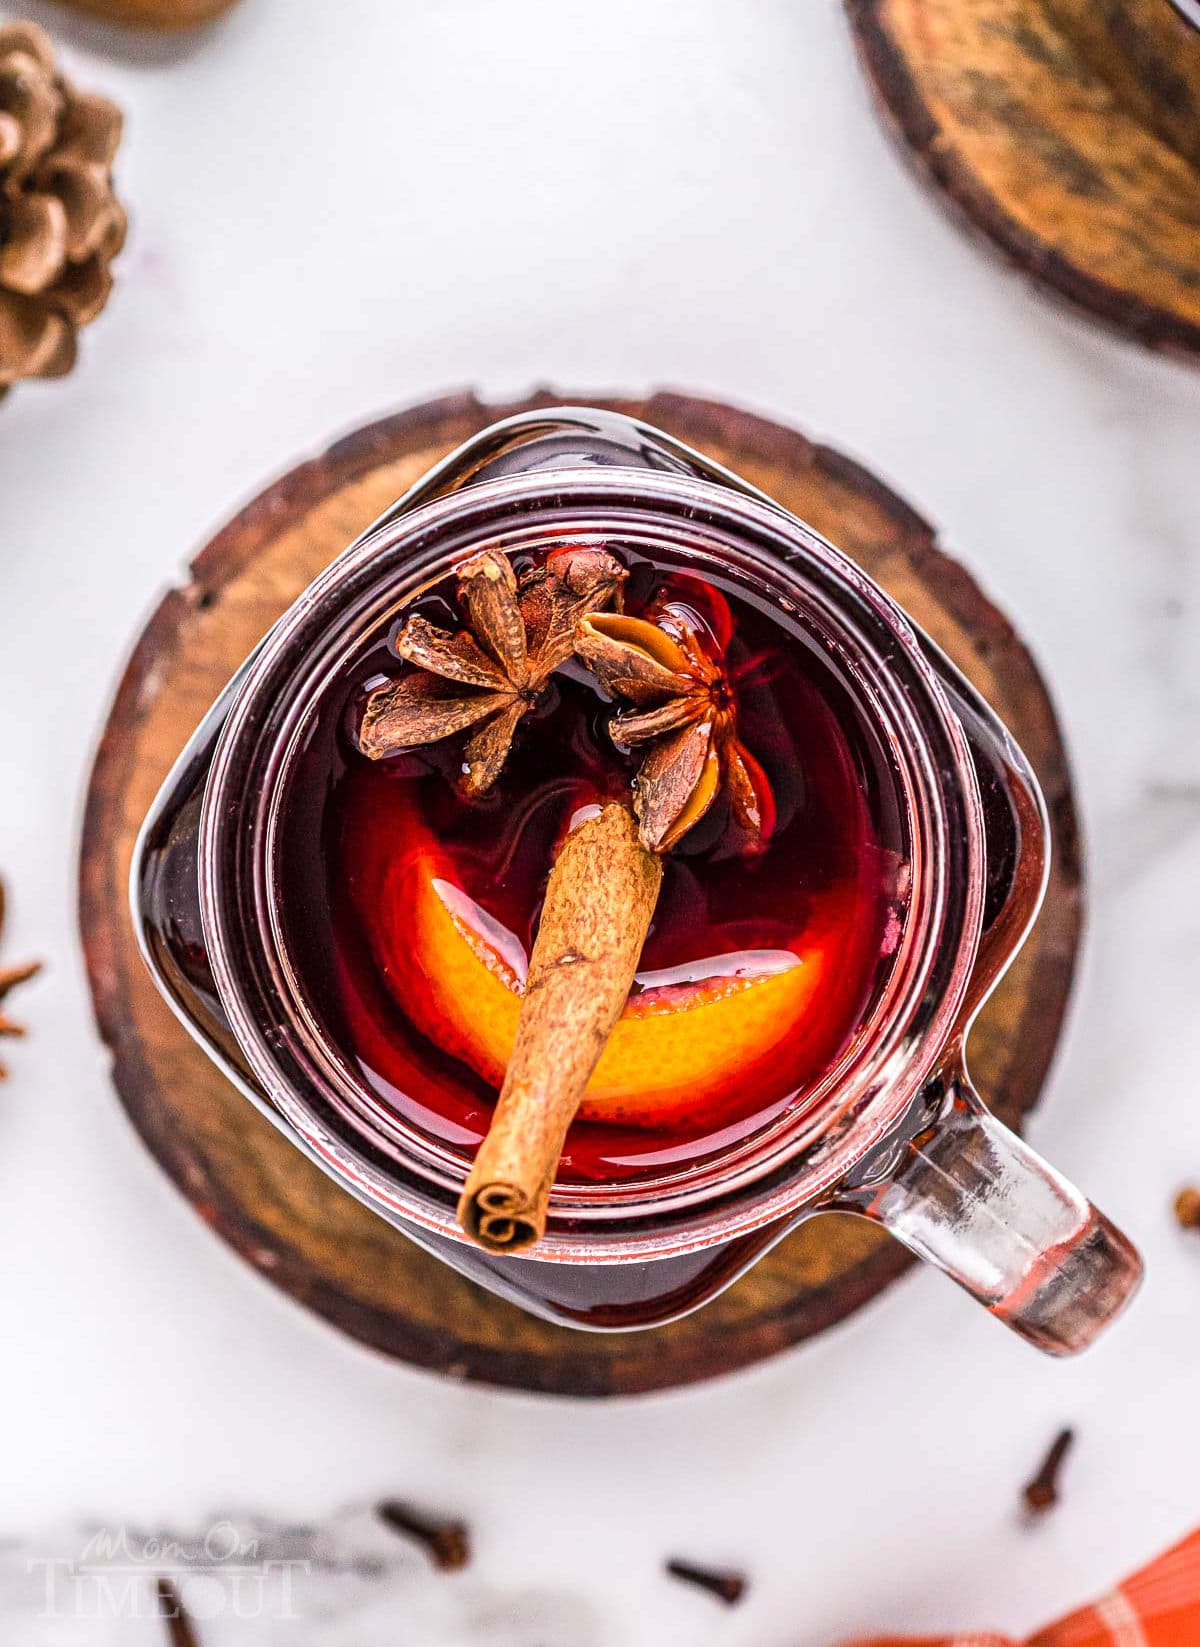 top down look into ball glass jar filled with mulled wine and garnished with a cinnamon stick, orange slice and star anise.